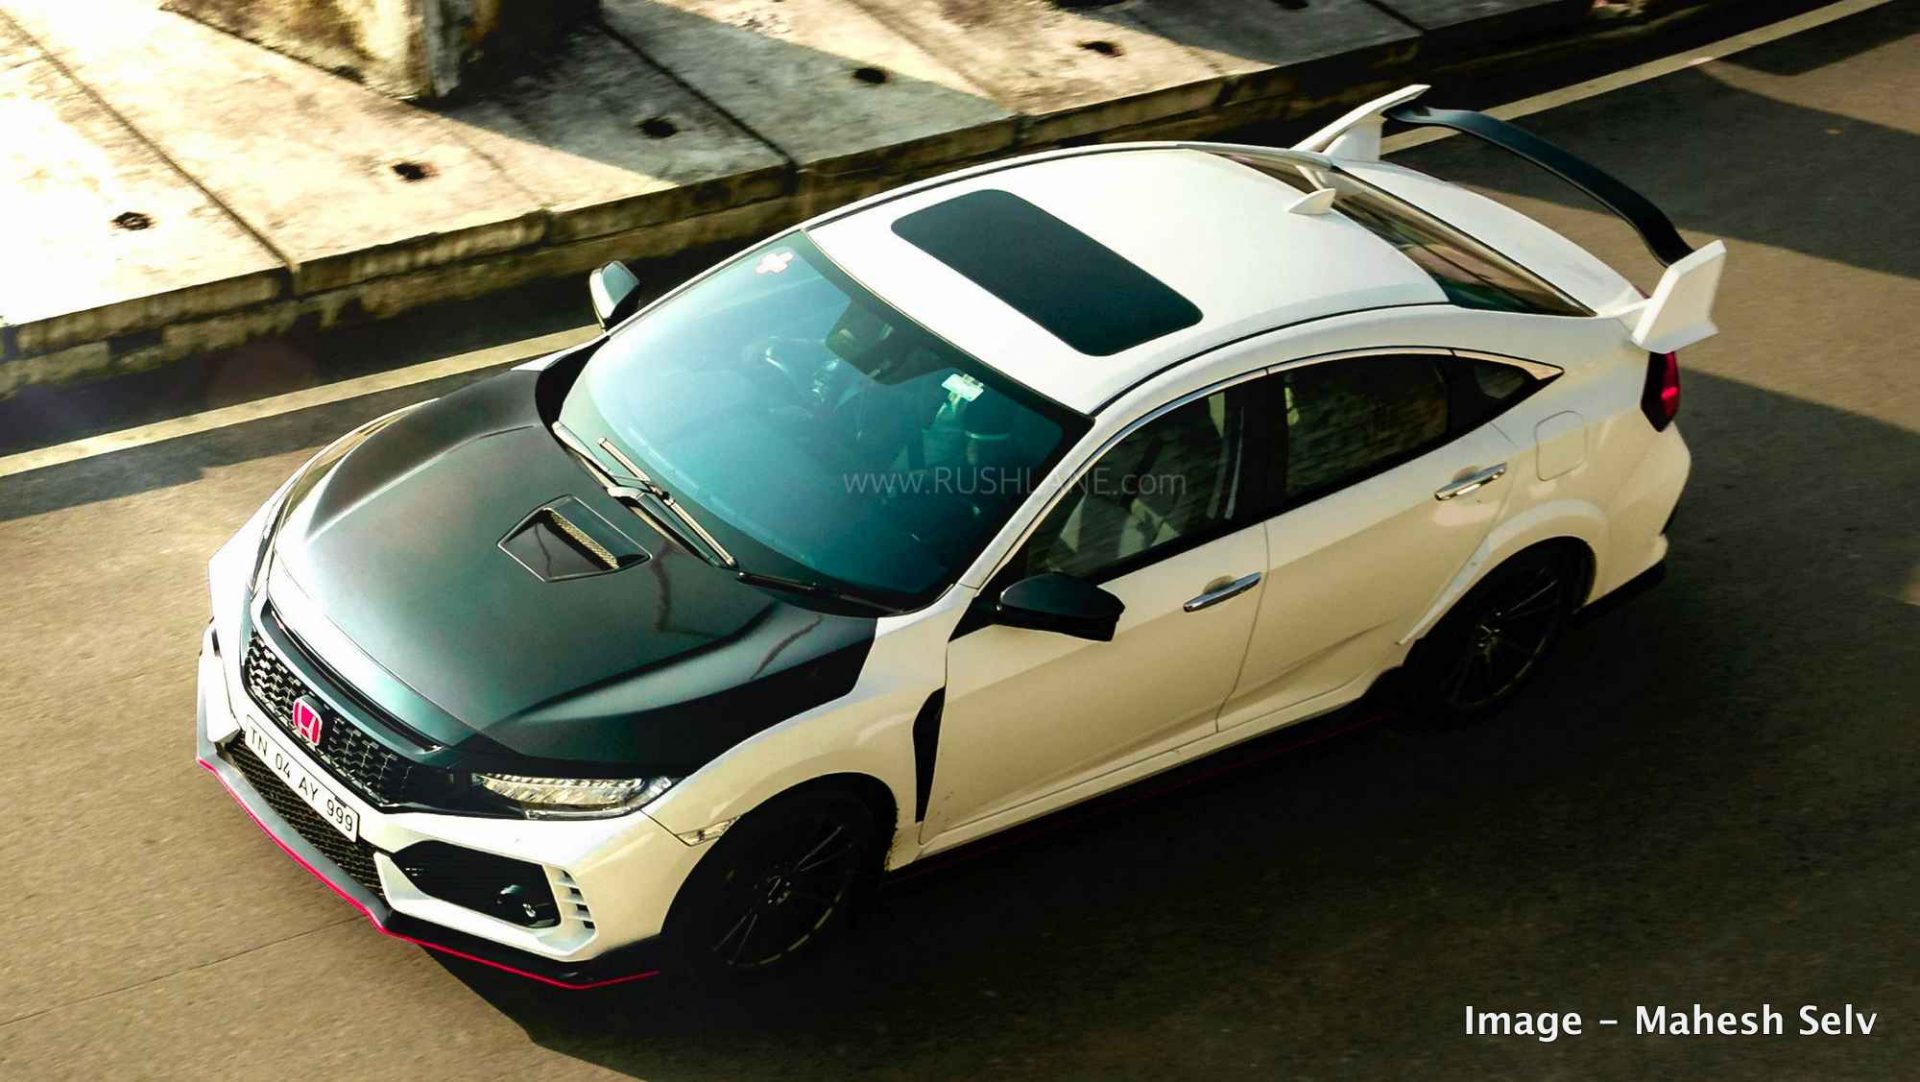 Honda Civic Owner Gets The Type R Kit Modification For Rs 3 Lakhs